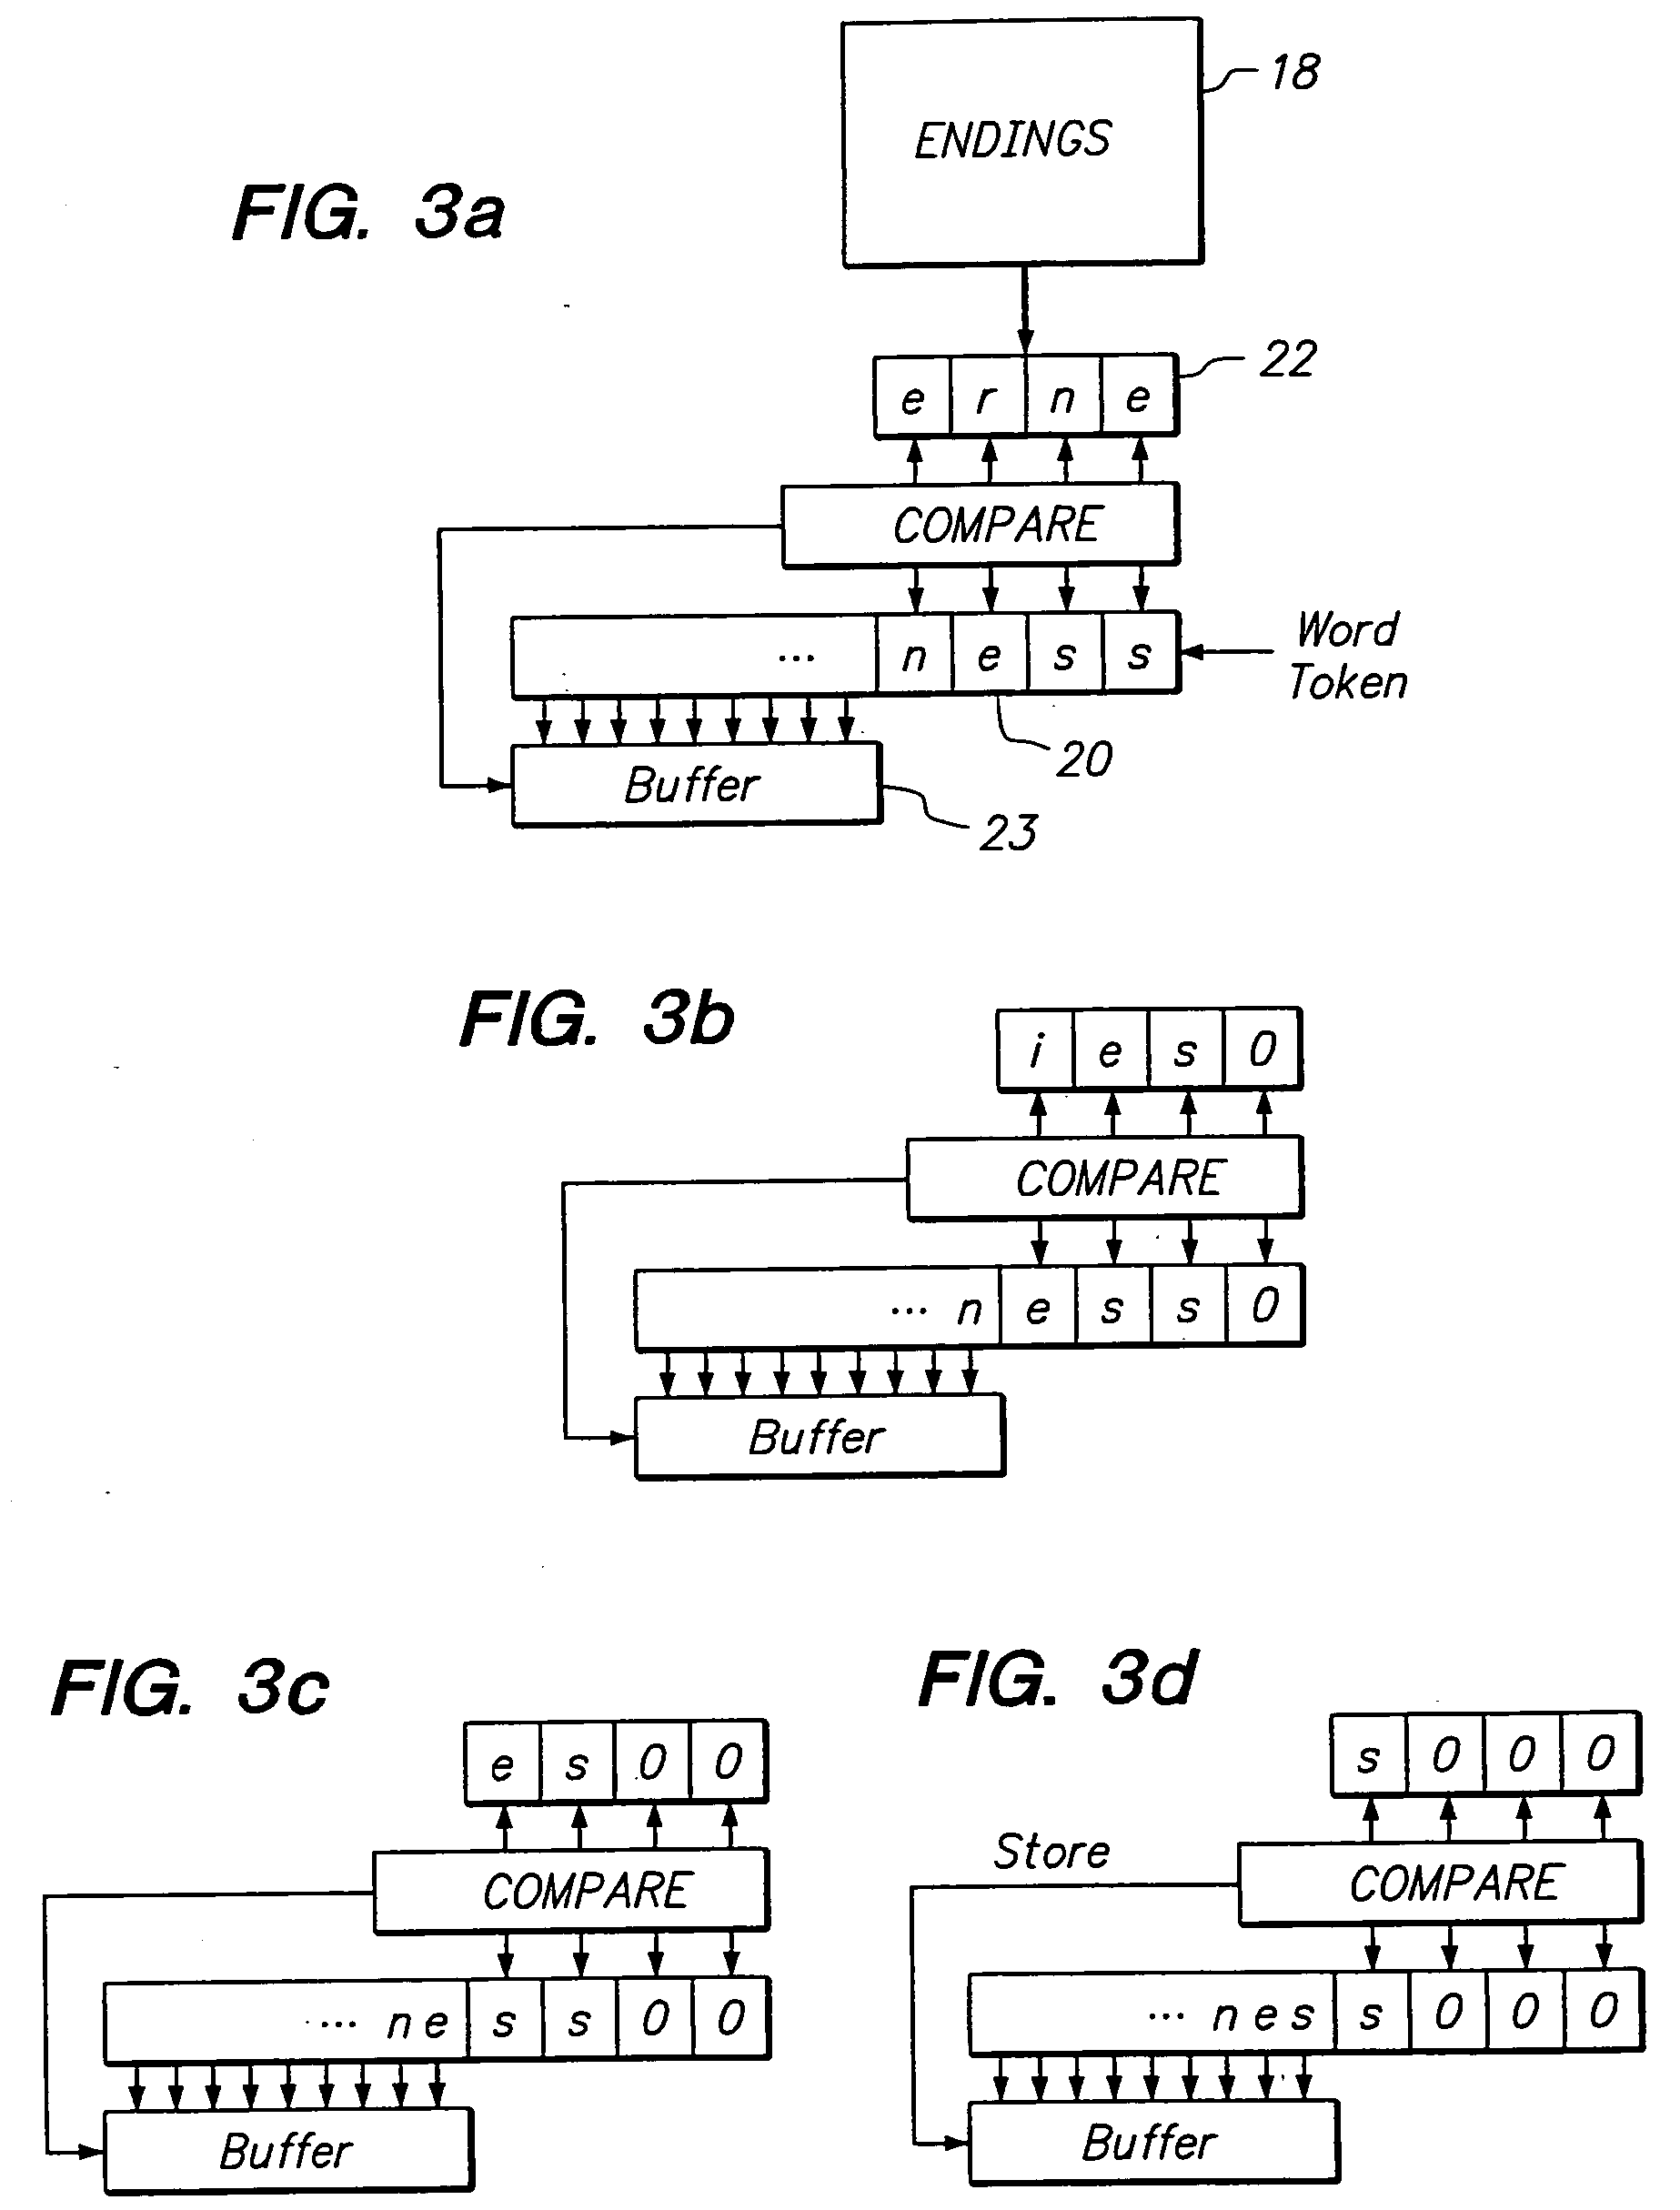 Multi-language document search and retrieval system